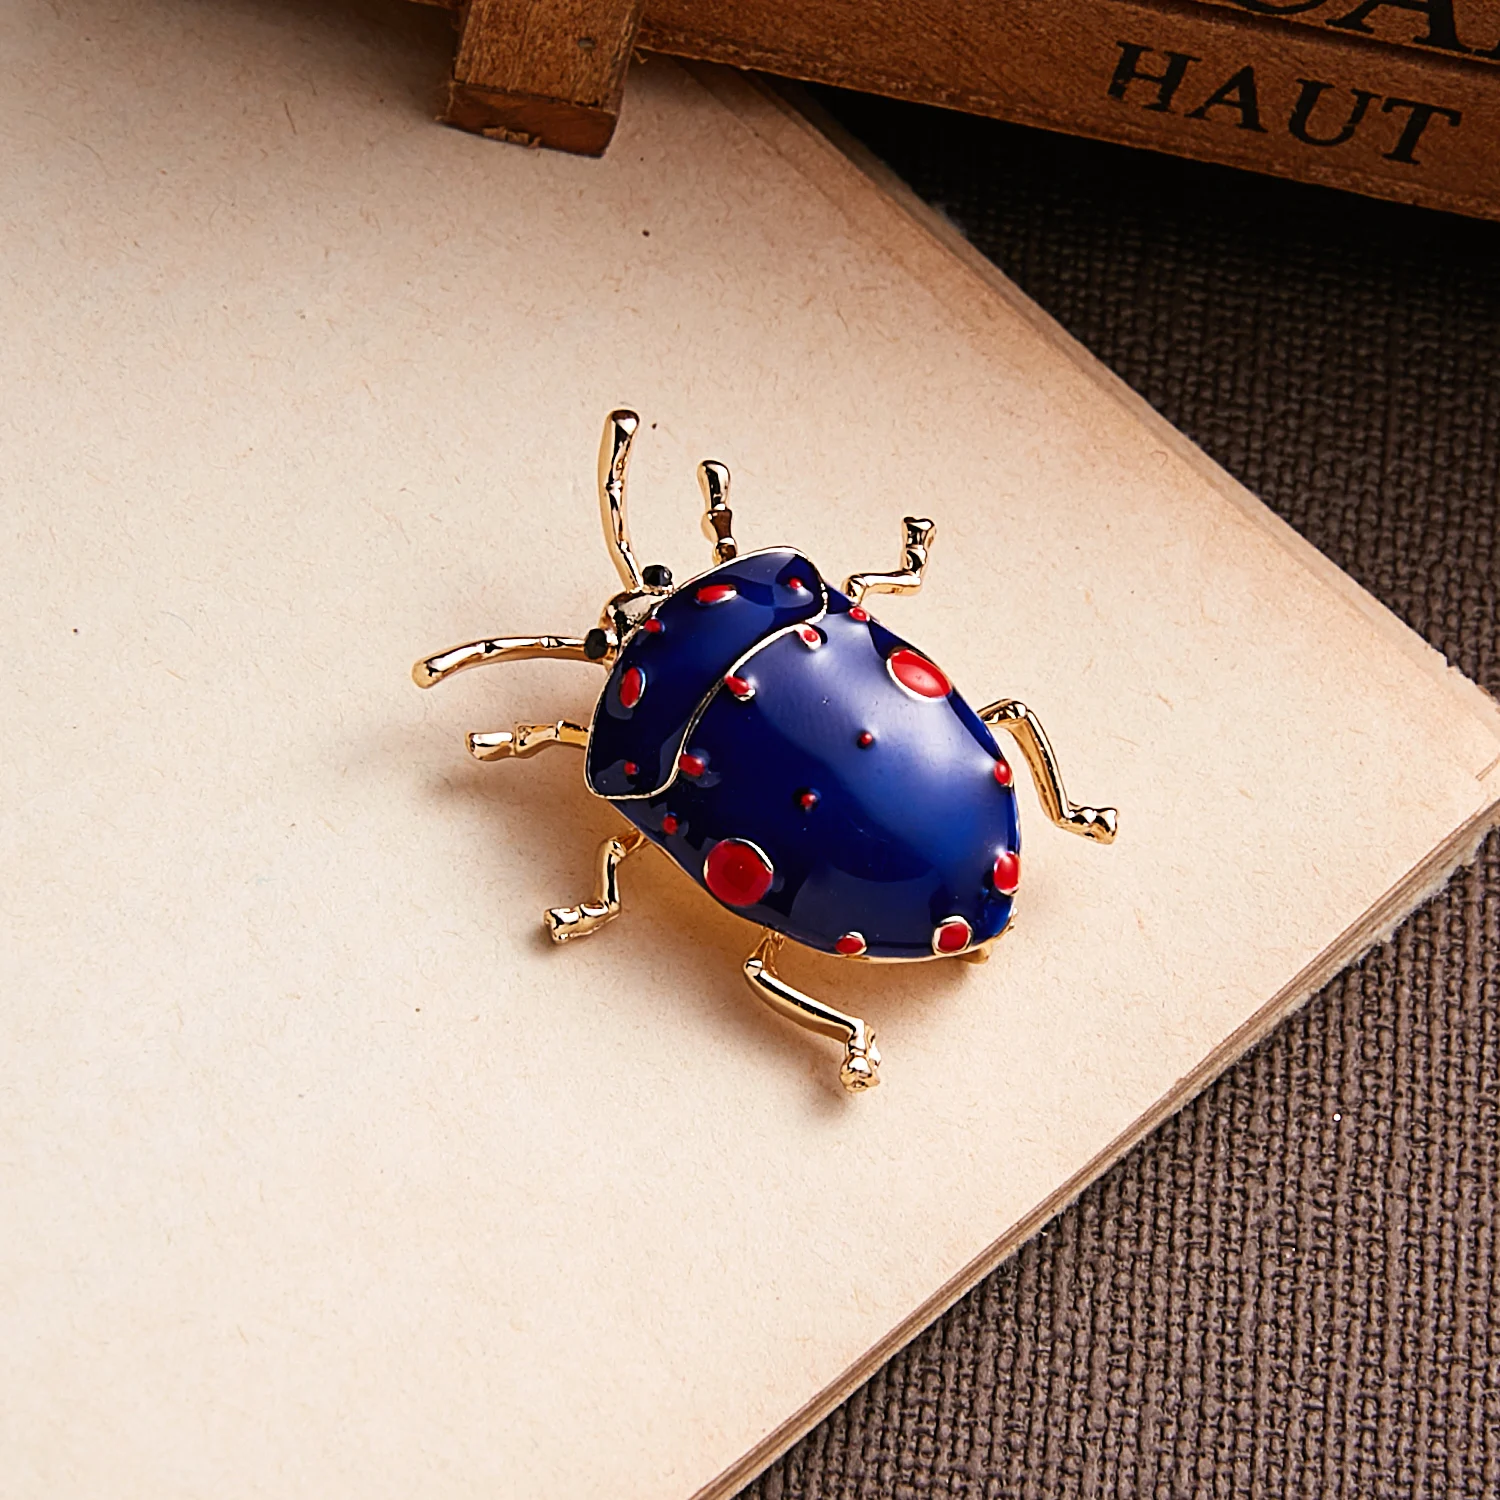 2 Colors Available Painting Oil Beetle Brooches Vintage Fashion Pins Enamel Green Blue Animal Insects Brooch Gift Jewelry | Украшения и